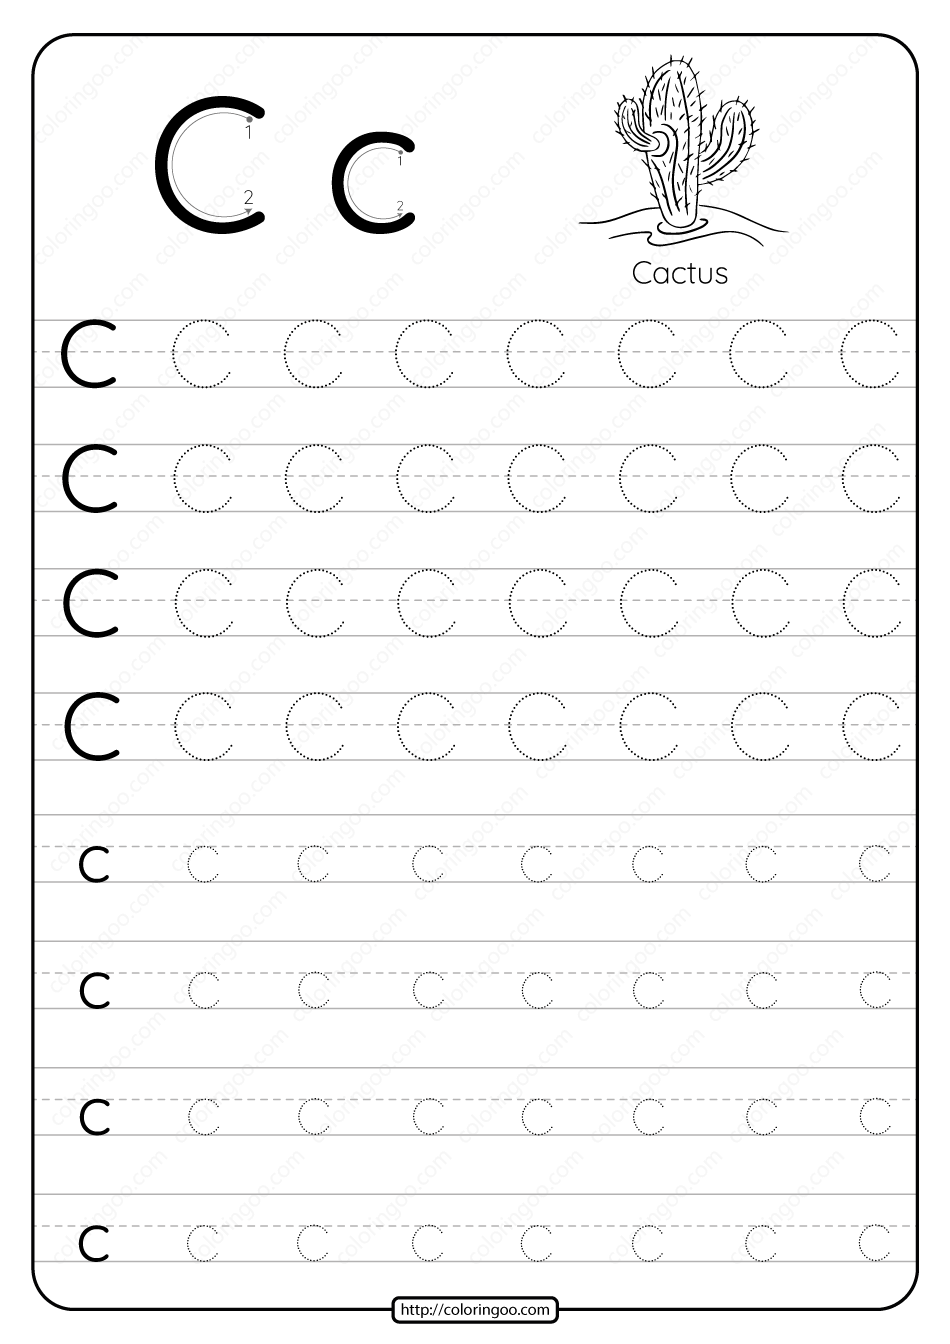 Printable Dotted Letter C Tracing Pdf Worksheet Free Printable Alphabet Worksheets Printable Alphabet Worksheets Tracing Worksheets Free